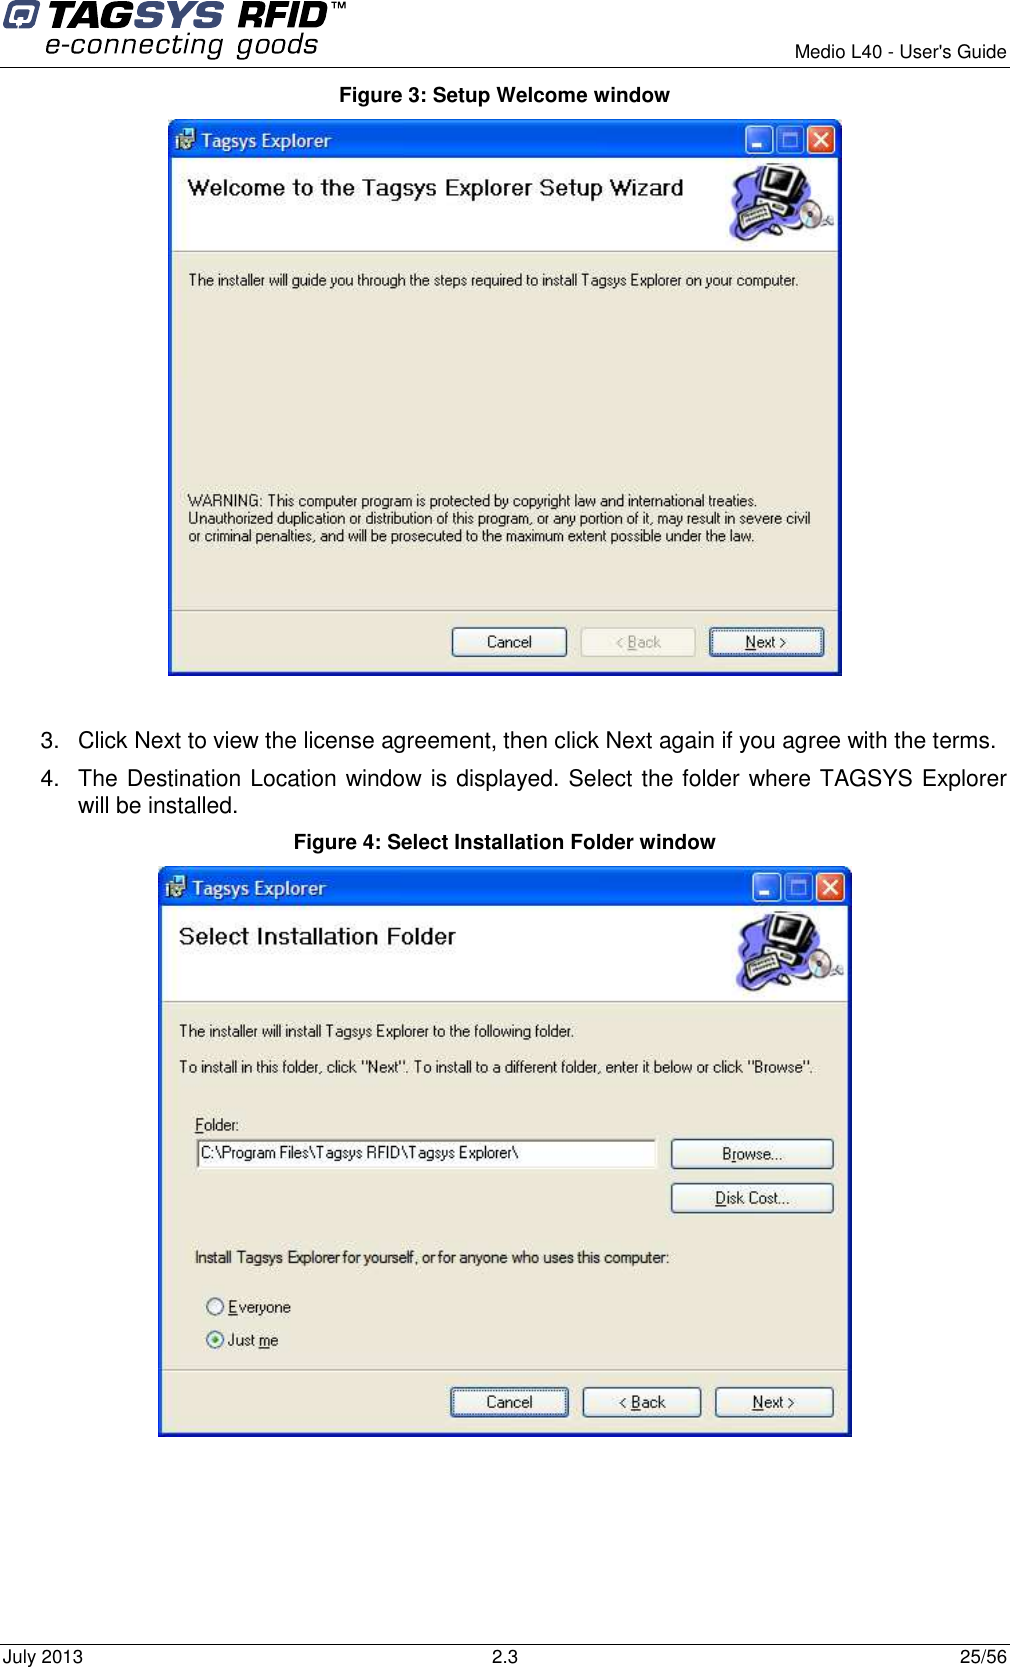        Medio L40 - User&apos;s Guide July 2013  2.3  25/56  Figure 3: Setup Welcome window   3.  Click Next to view the license agreement, then click Next again if you agree with the terms.  4.  The Destination Location window is displayed. Select the folder where TAGSYS Explorer will be installed.  Figure 4: Select Installation Folder window  